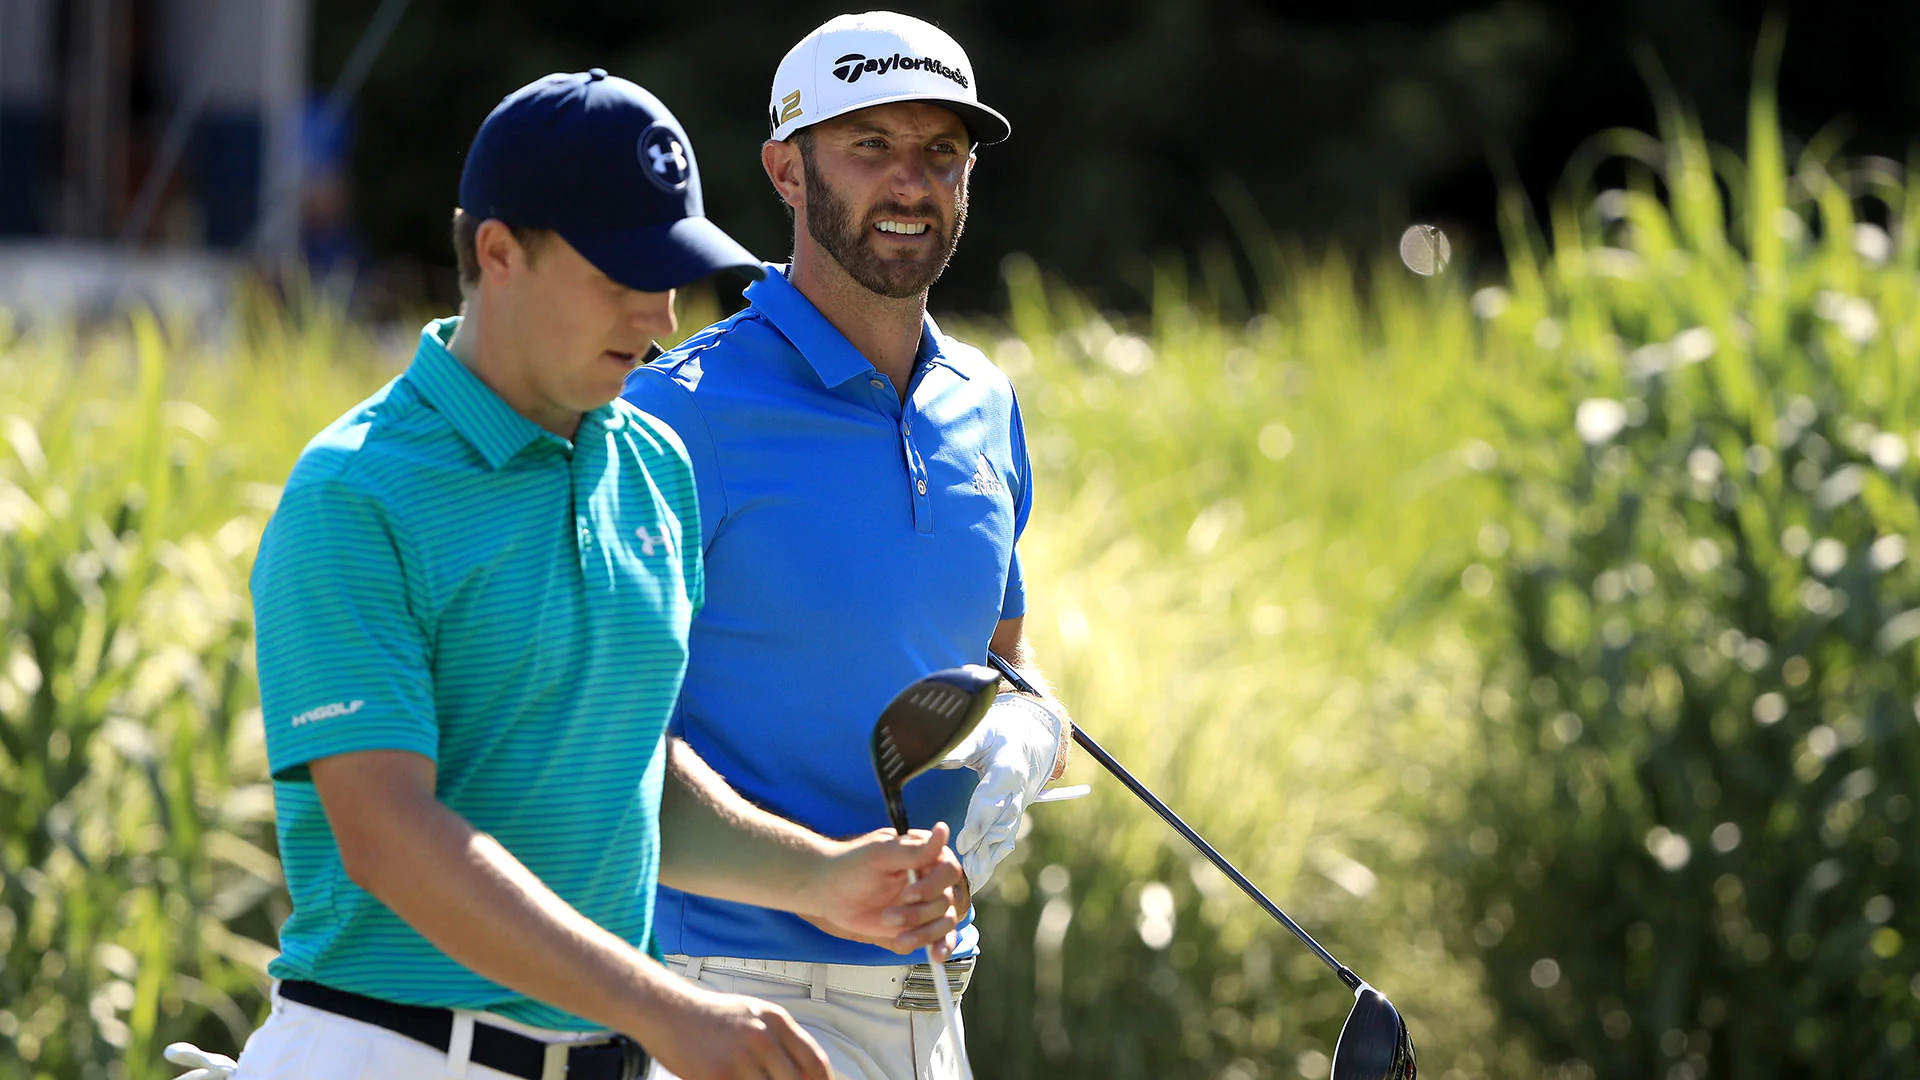 D. Johnson, Spieth betting co-favorites for Open